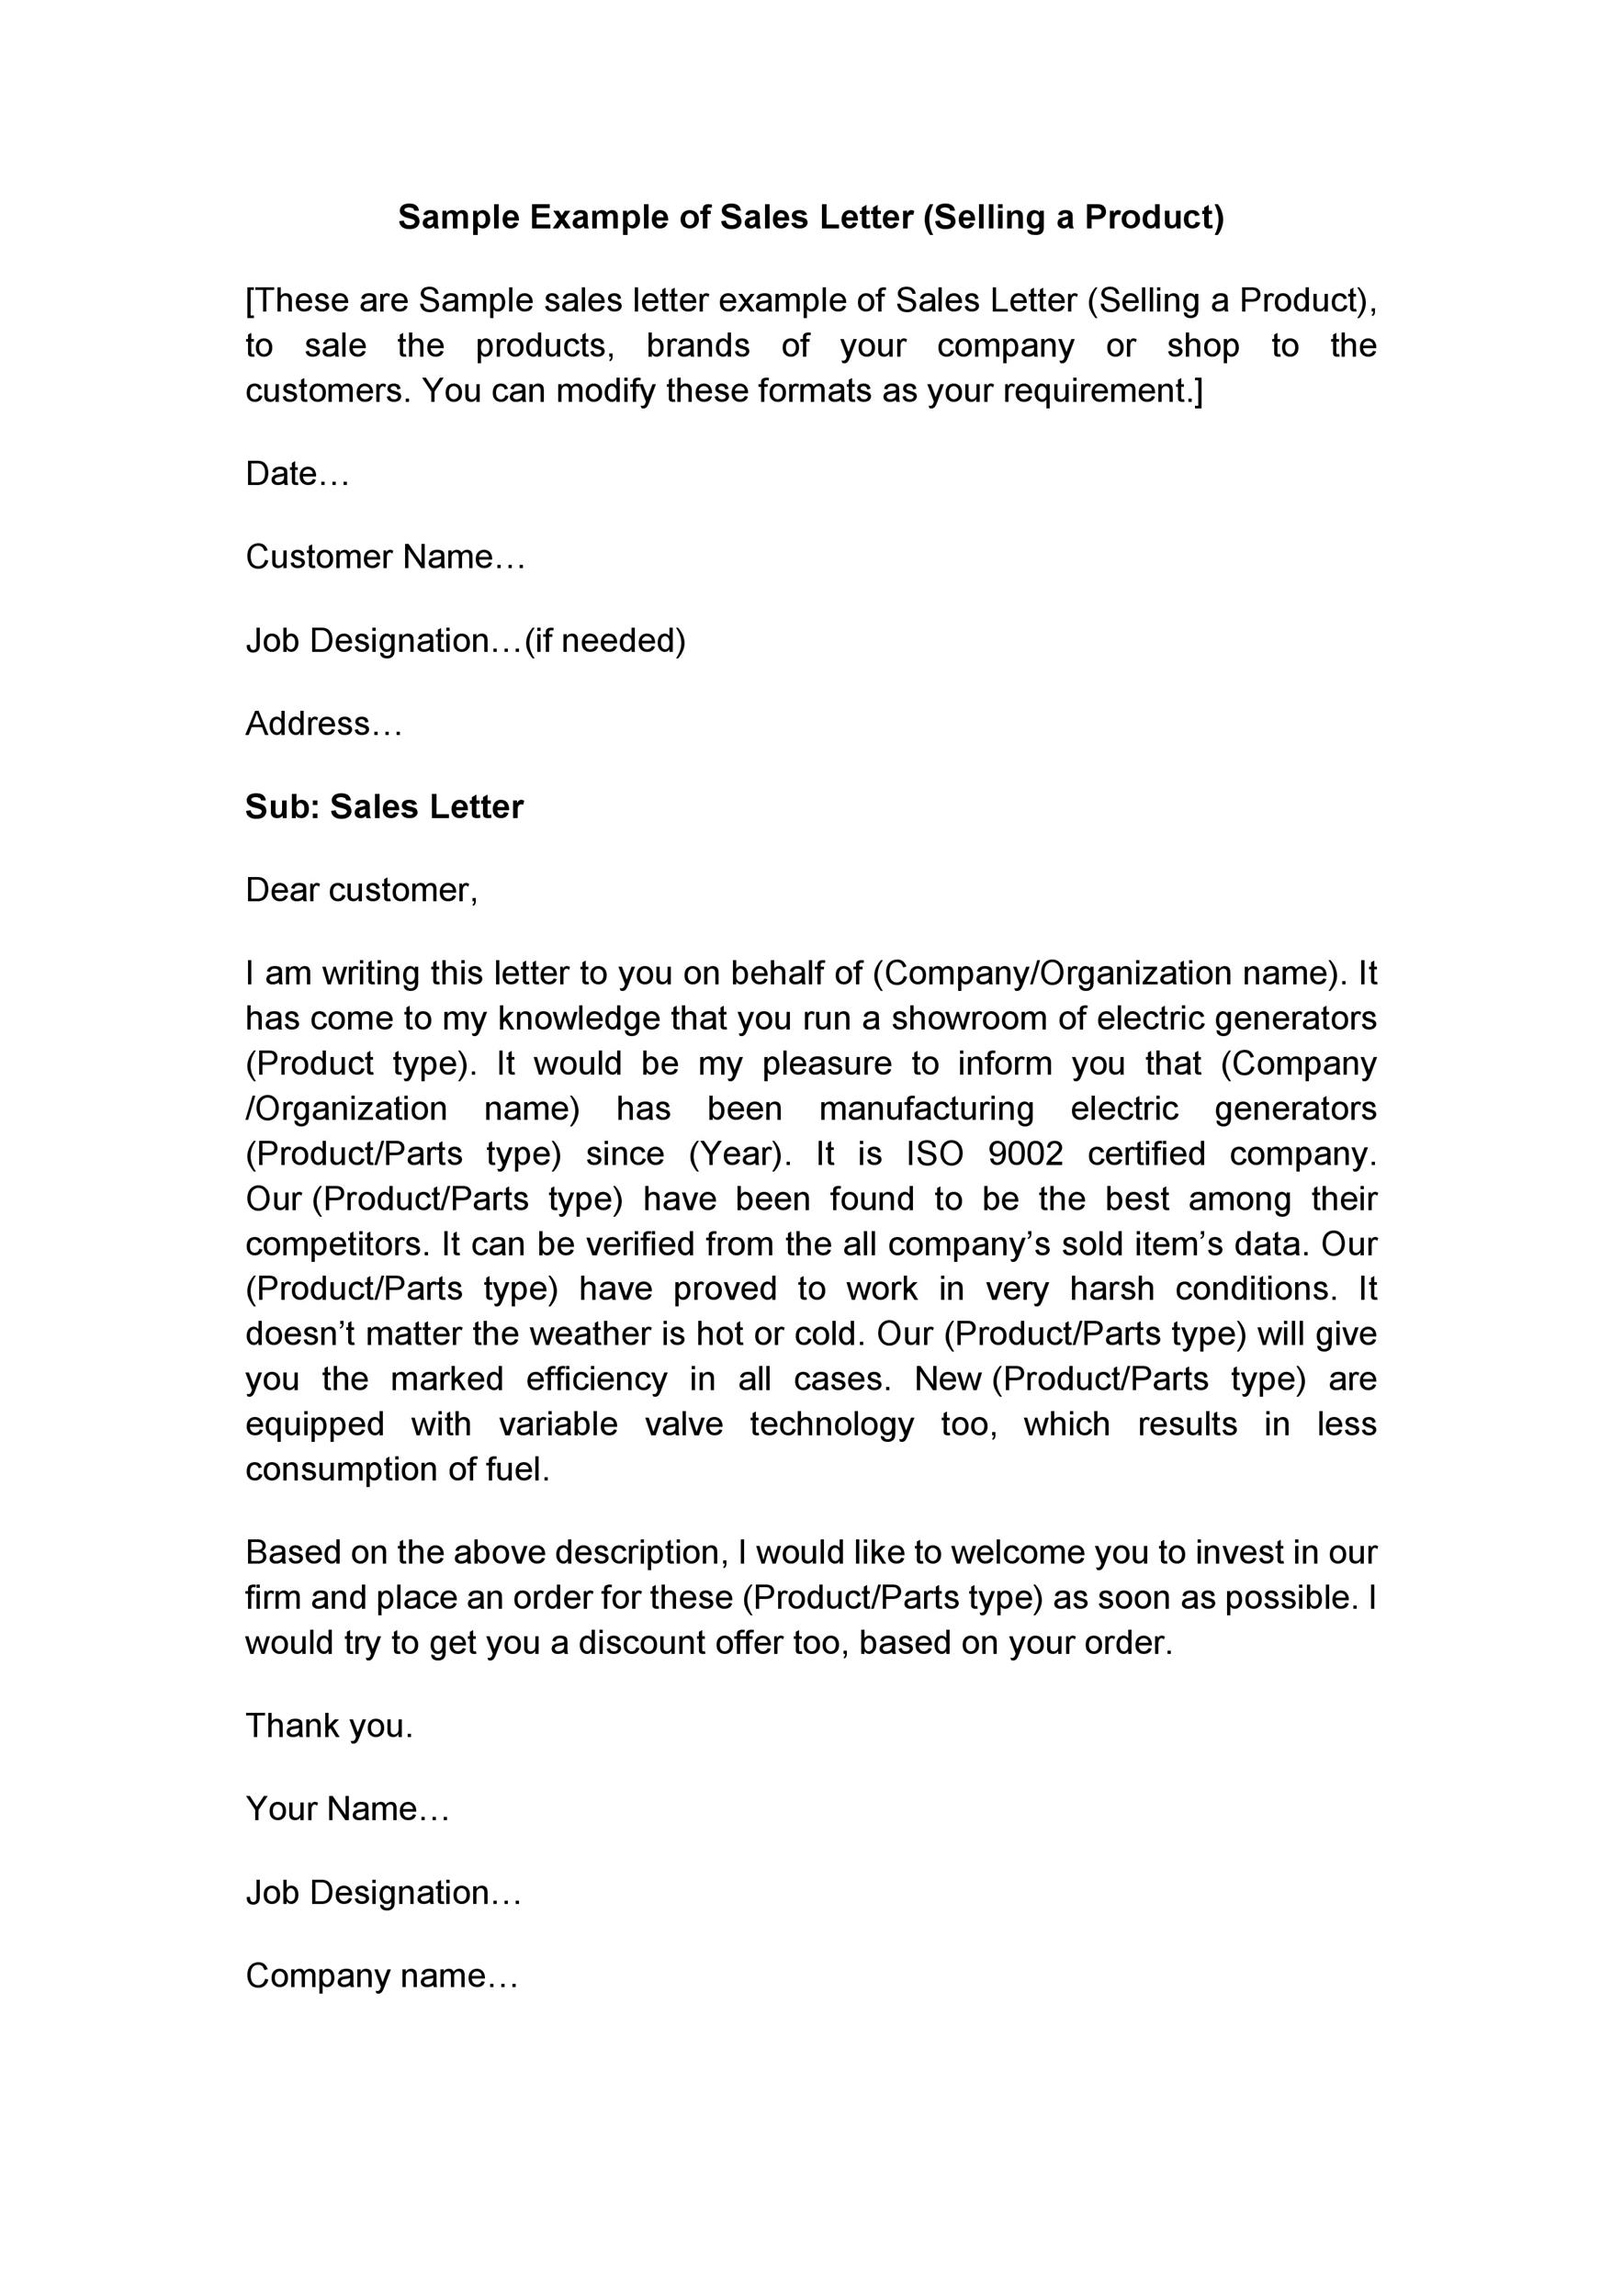 Sample Letter For Selling A Car from templatelab.com